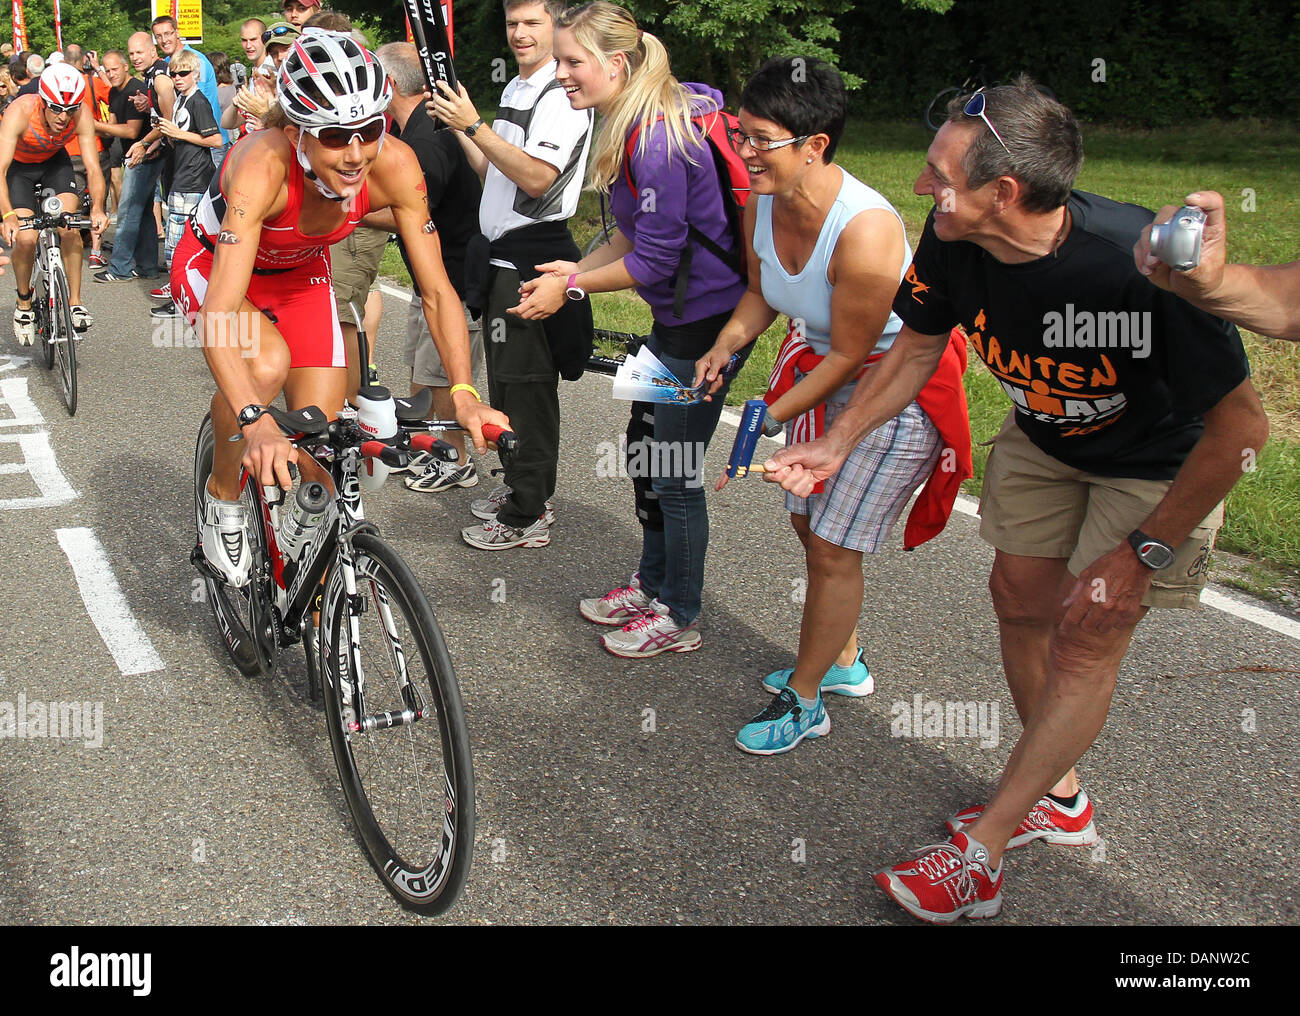 British triathlete Chrissie Wellington rides her bike during the cycling etappe of the 10th Ironman Challenge in Hipoltstein, Germany, 10 July 2011. For the ironman, the participants have to swim 3,8 km, cycle 180 km and run 42,195 km. Photo: Daniel Karmann Stock Photo